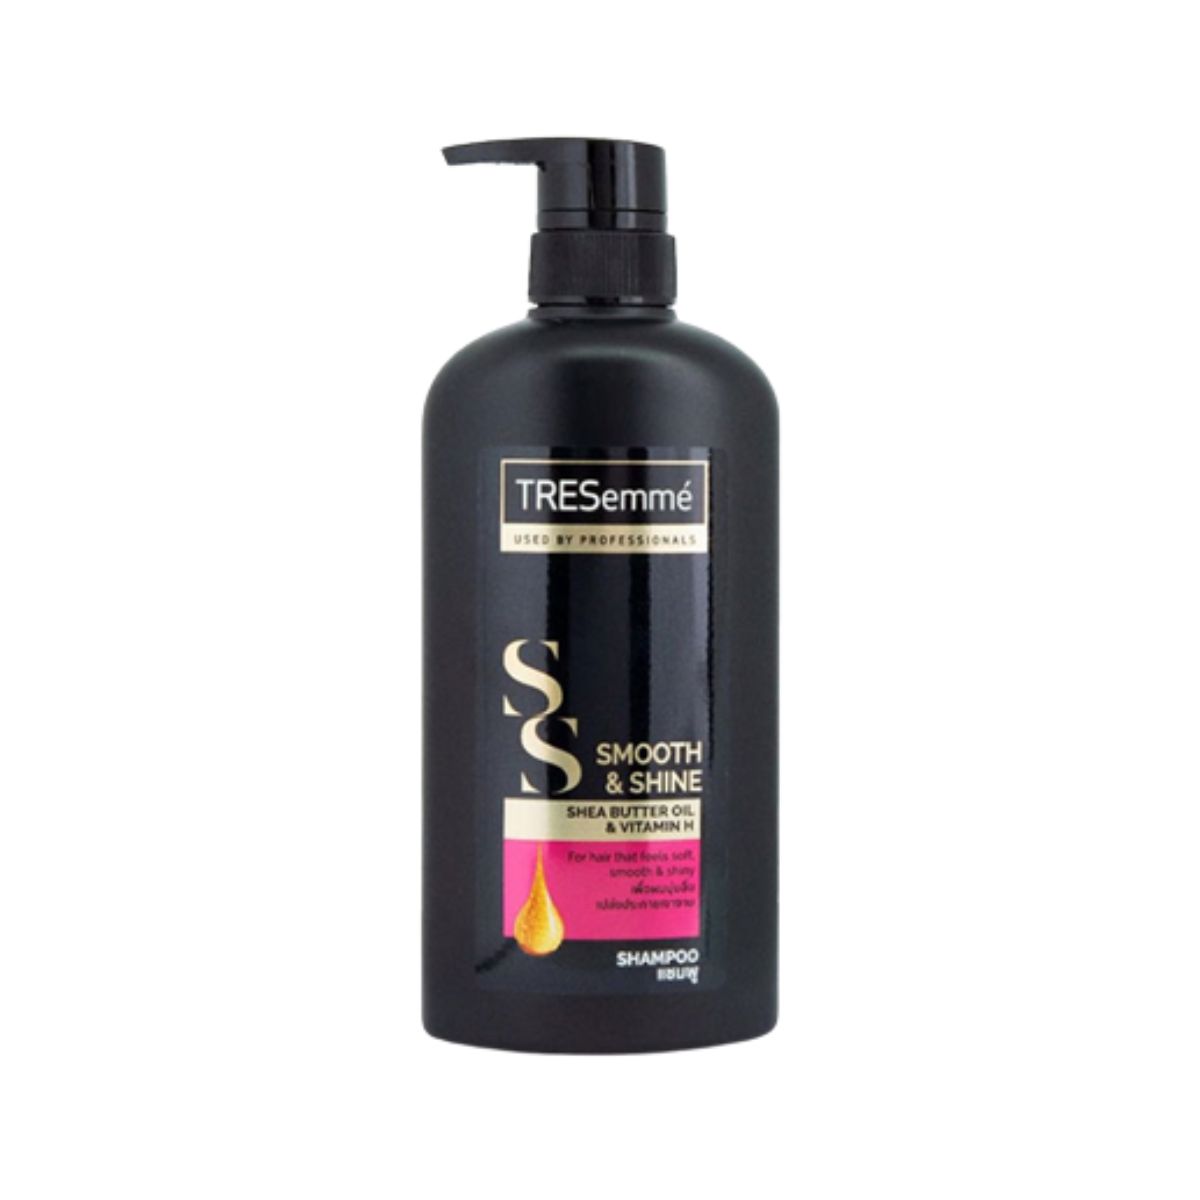 Tresemme Smooth and Shine Shea Butter Oil & Vitamin H Shampoo - 450ml